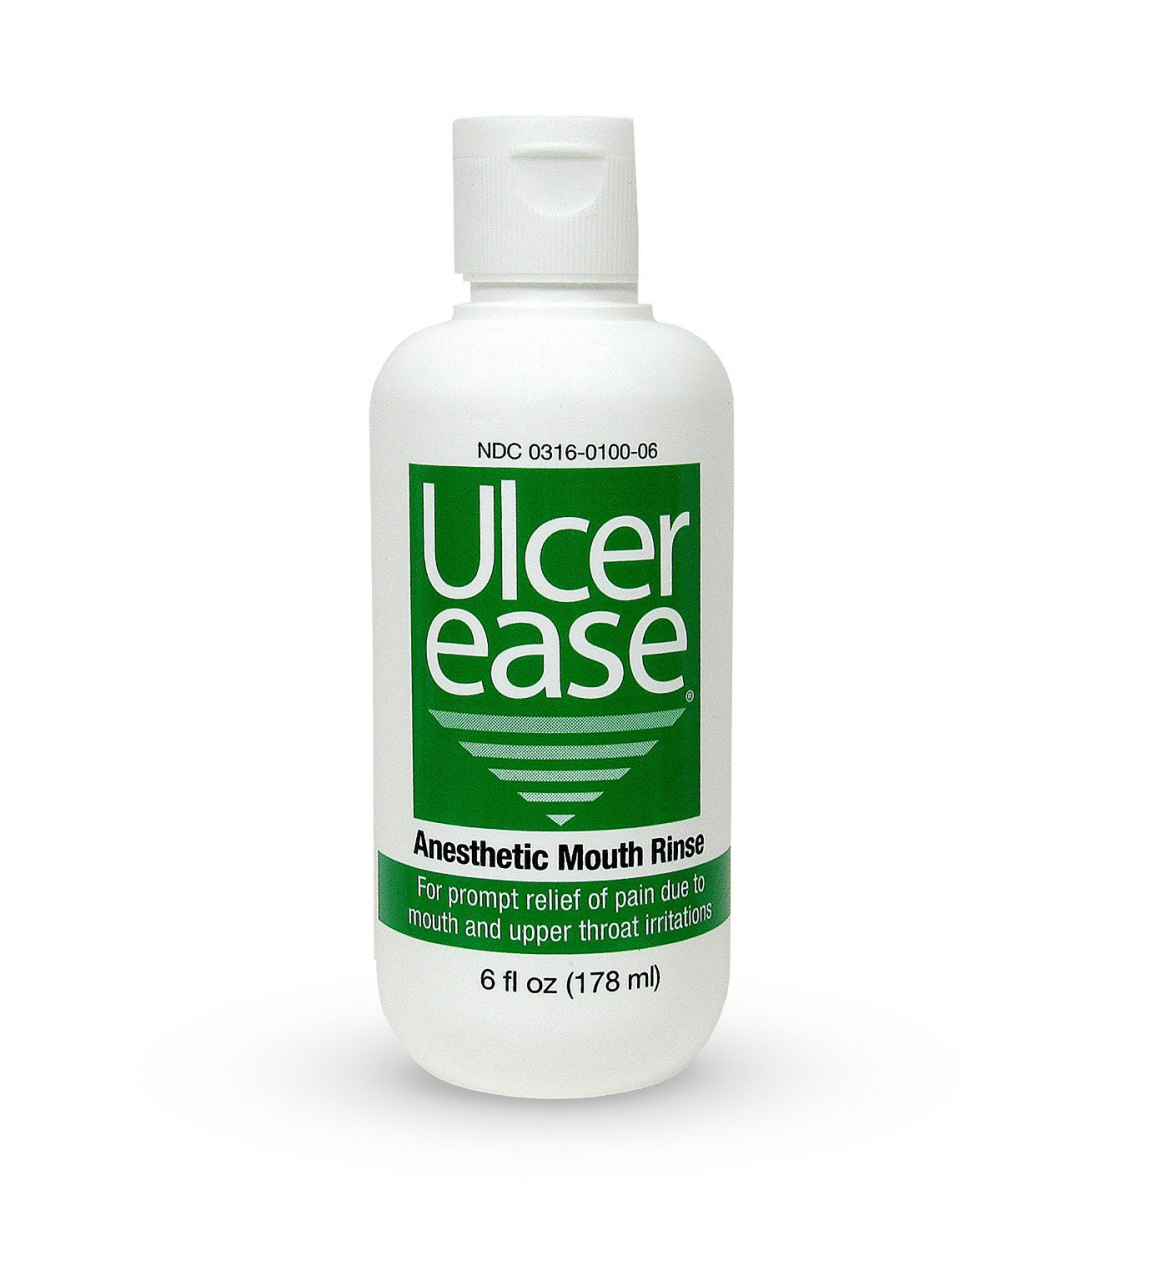 Ulcer Ease Medicated Mouth Rinse 6 oz